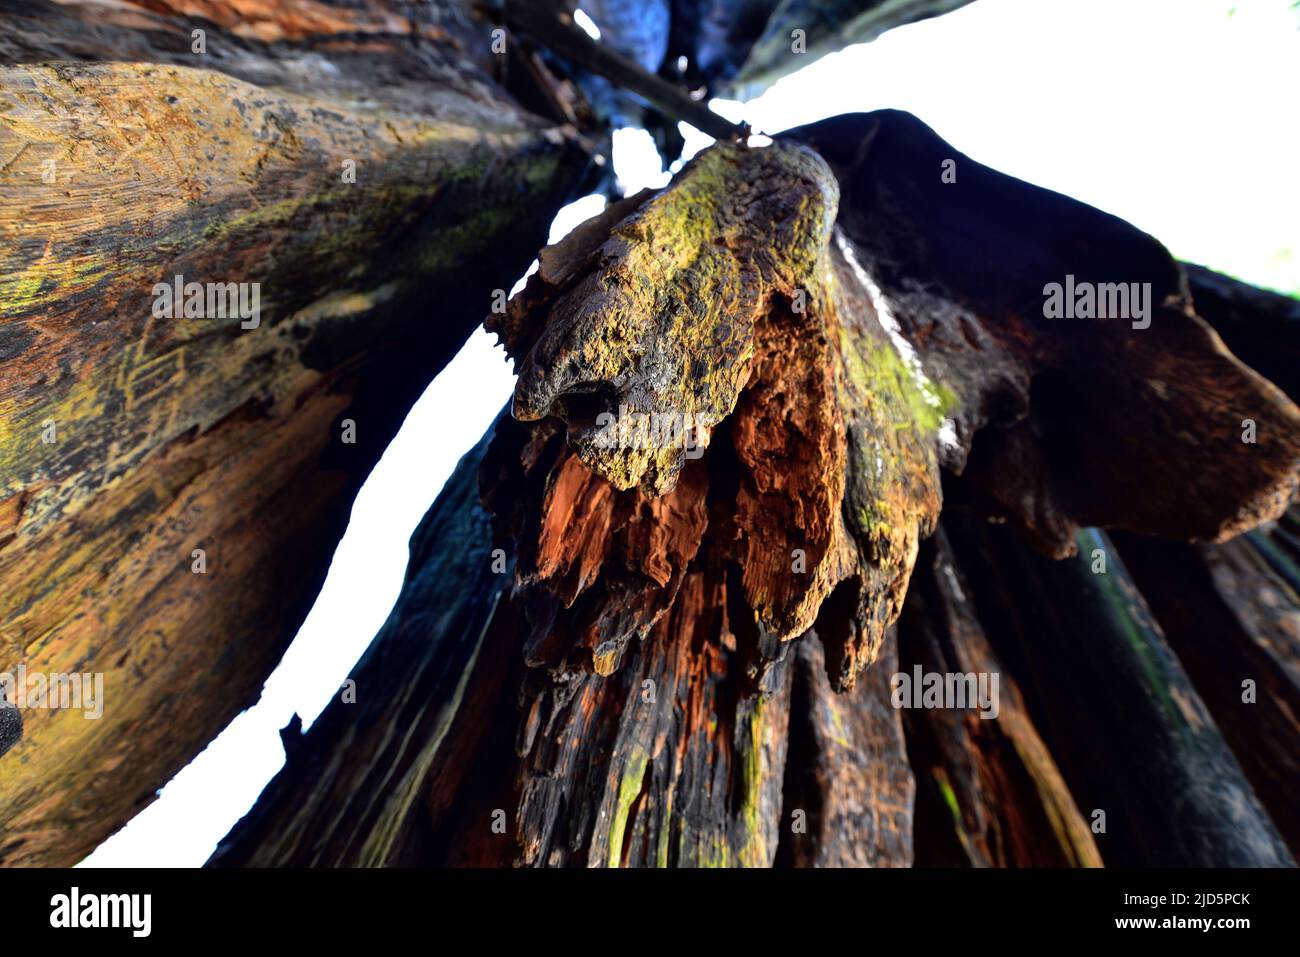 The 800-year-old Hollow Tree, a Western Red Cedar tree stump, is one of the most famous landmarks at Stanley Park in Vancouver. The tree was restored Stock Photo